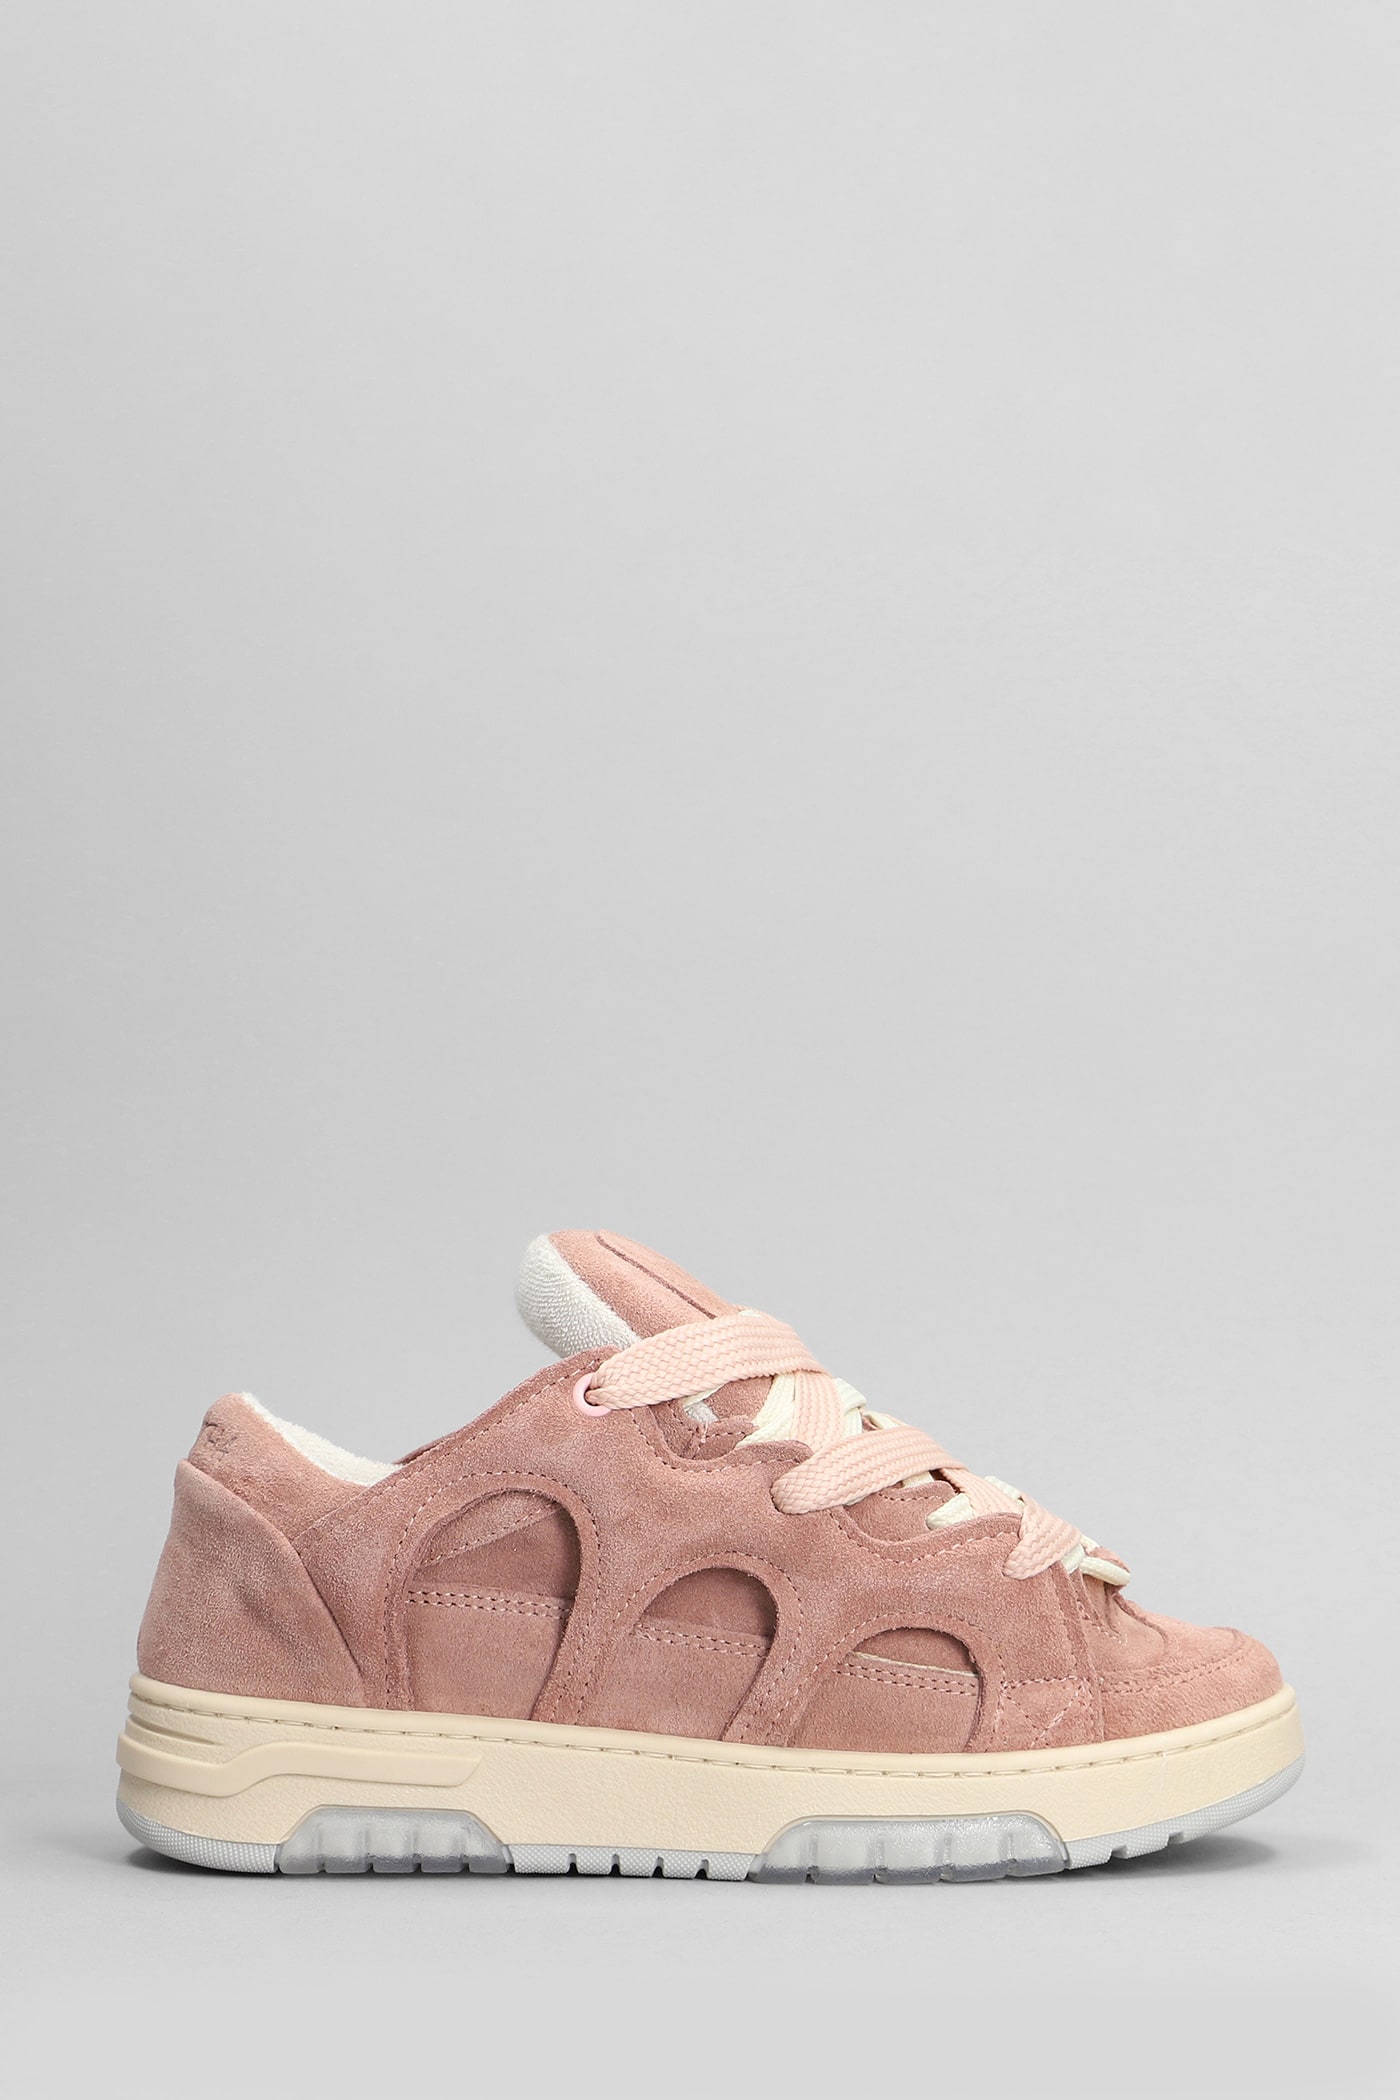 Paura Santha 1 Trainers In Rose-pink Suede